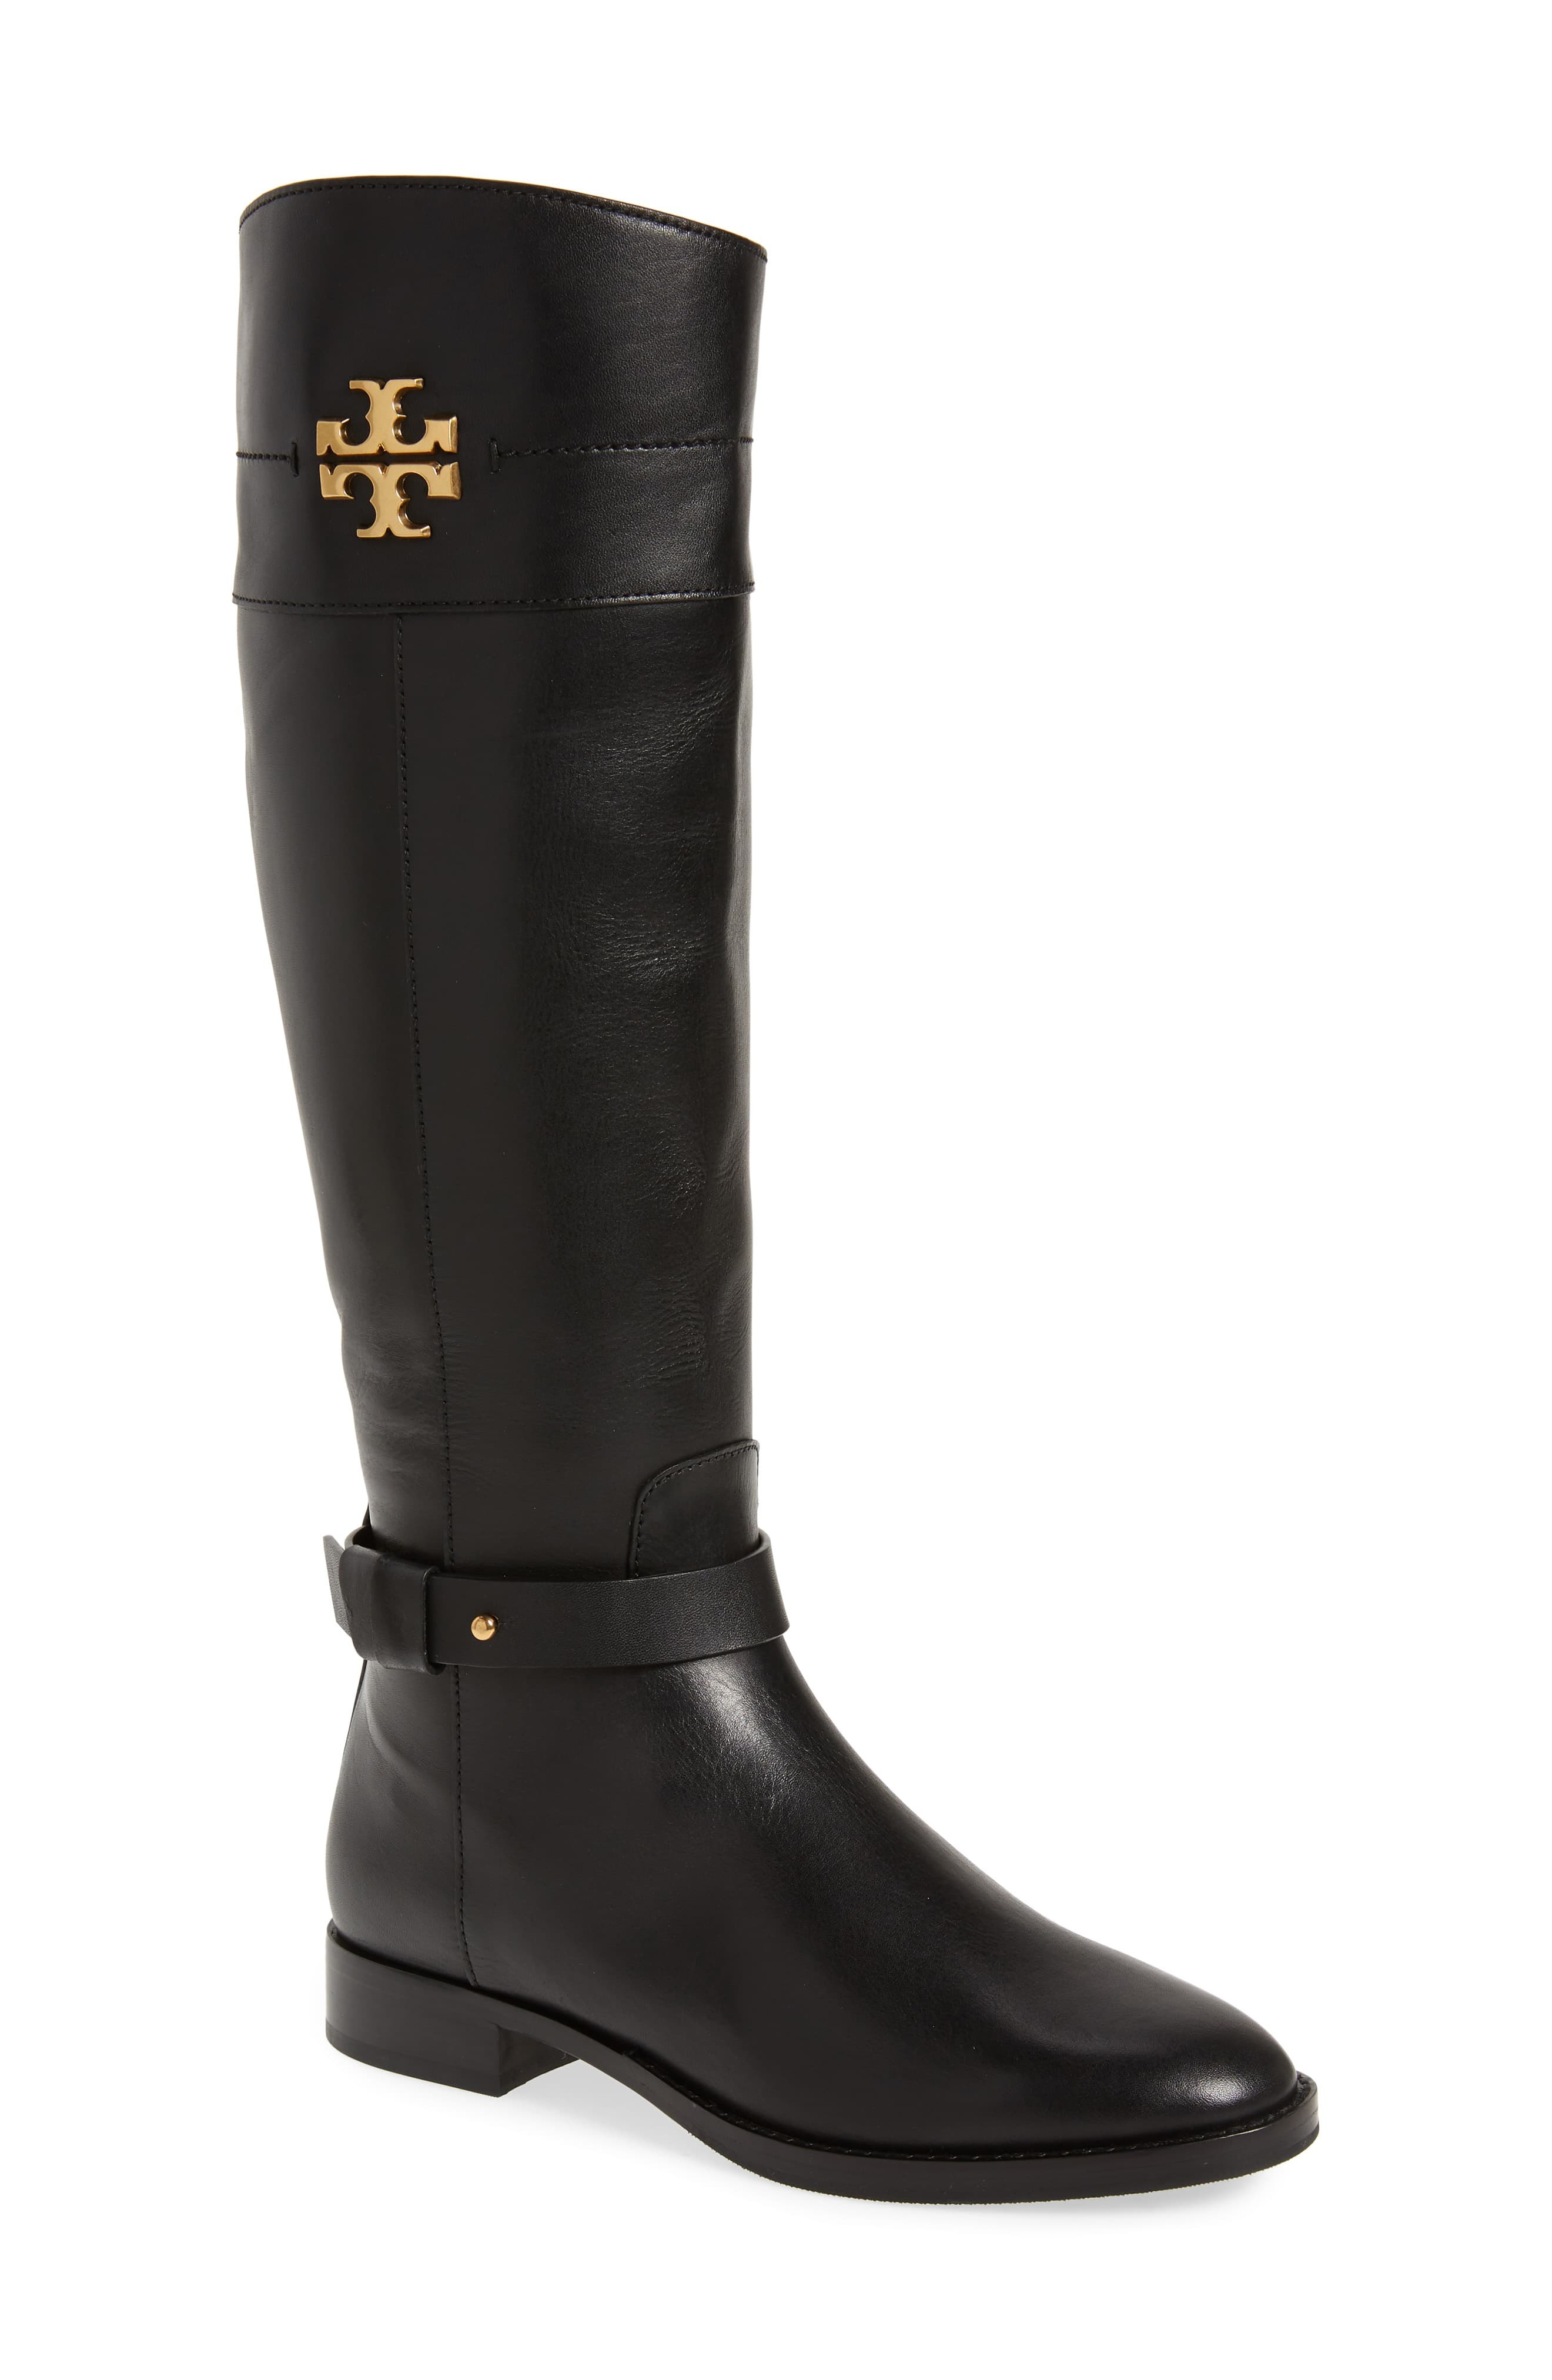 Tory Burch Everly Riding Boot, $333 | Nordstrom | Lookastic